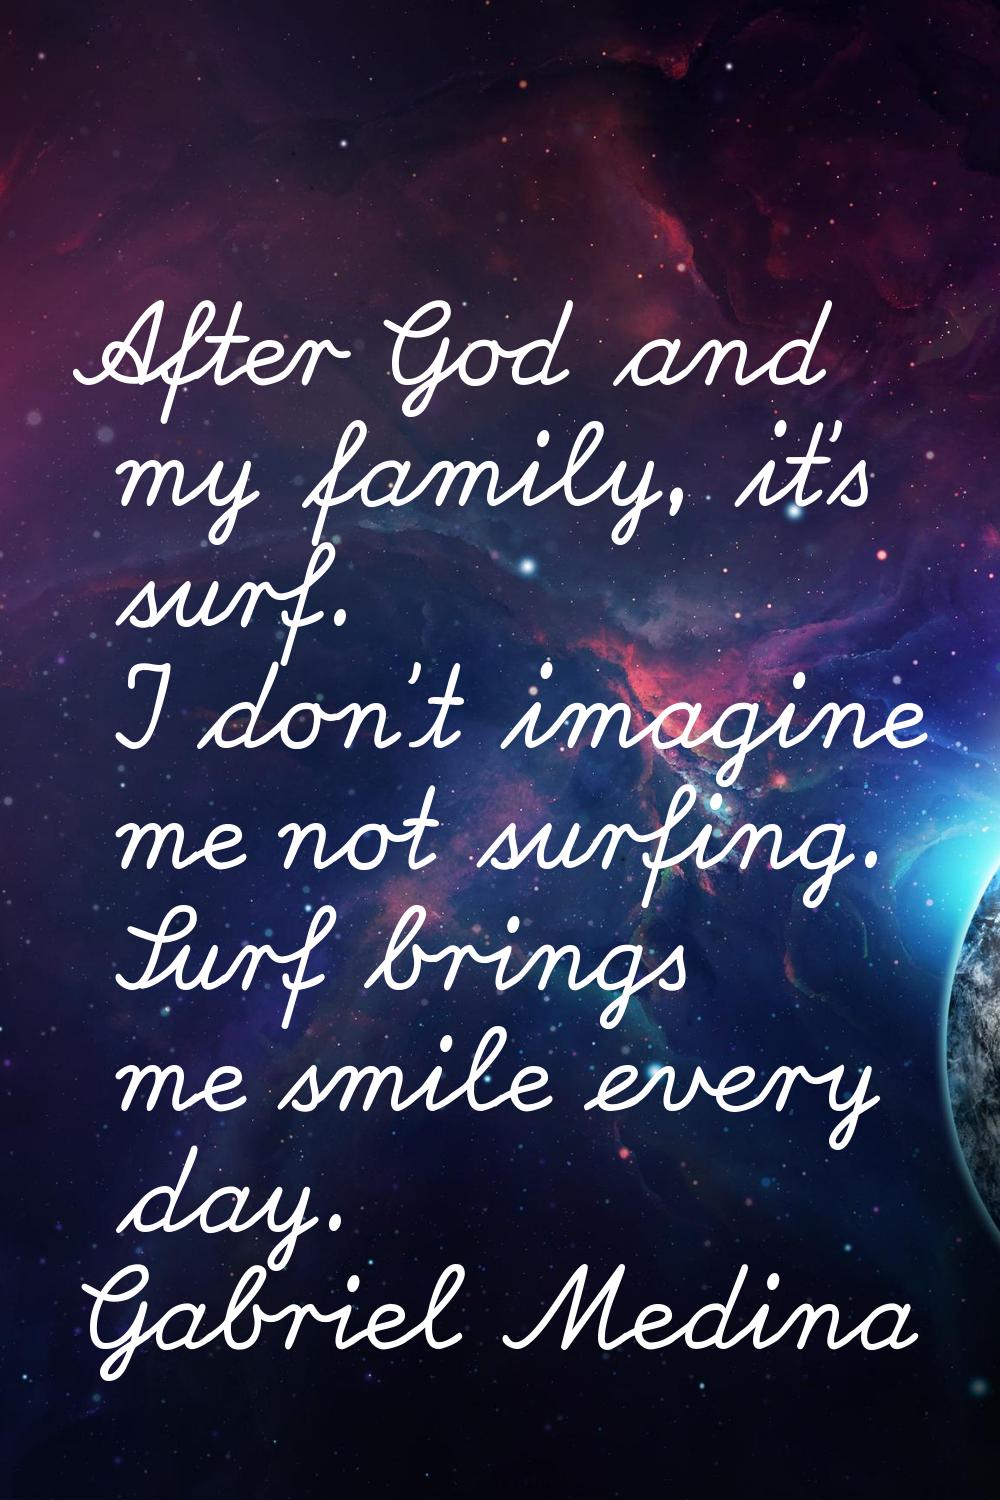 After God and my family, it's surf. I don't imagine me not surfing. Surf brings me smile every day.